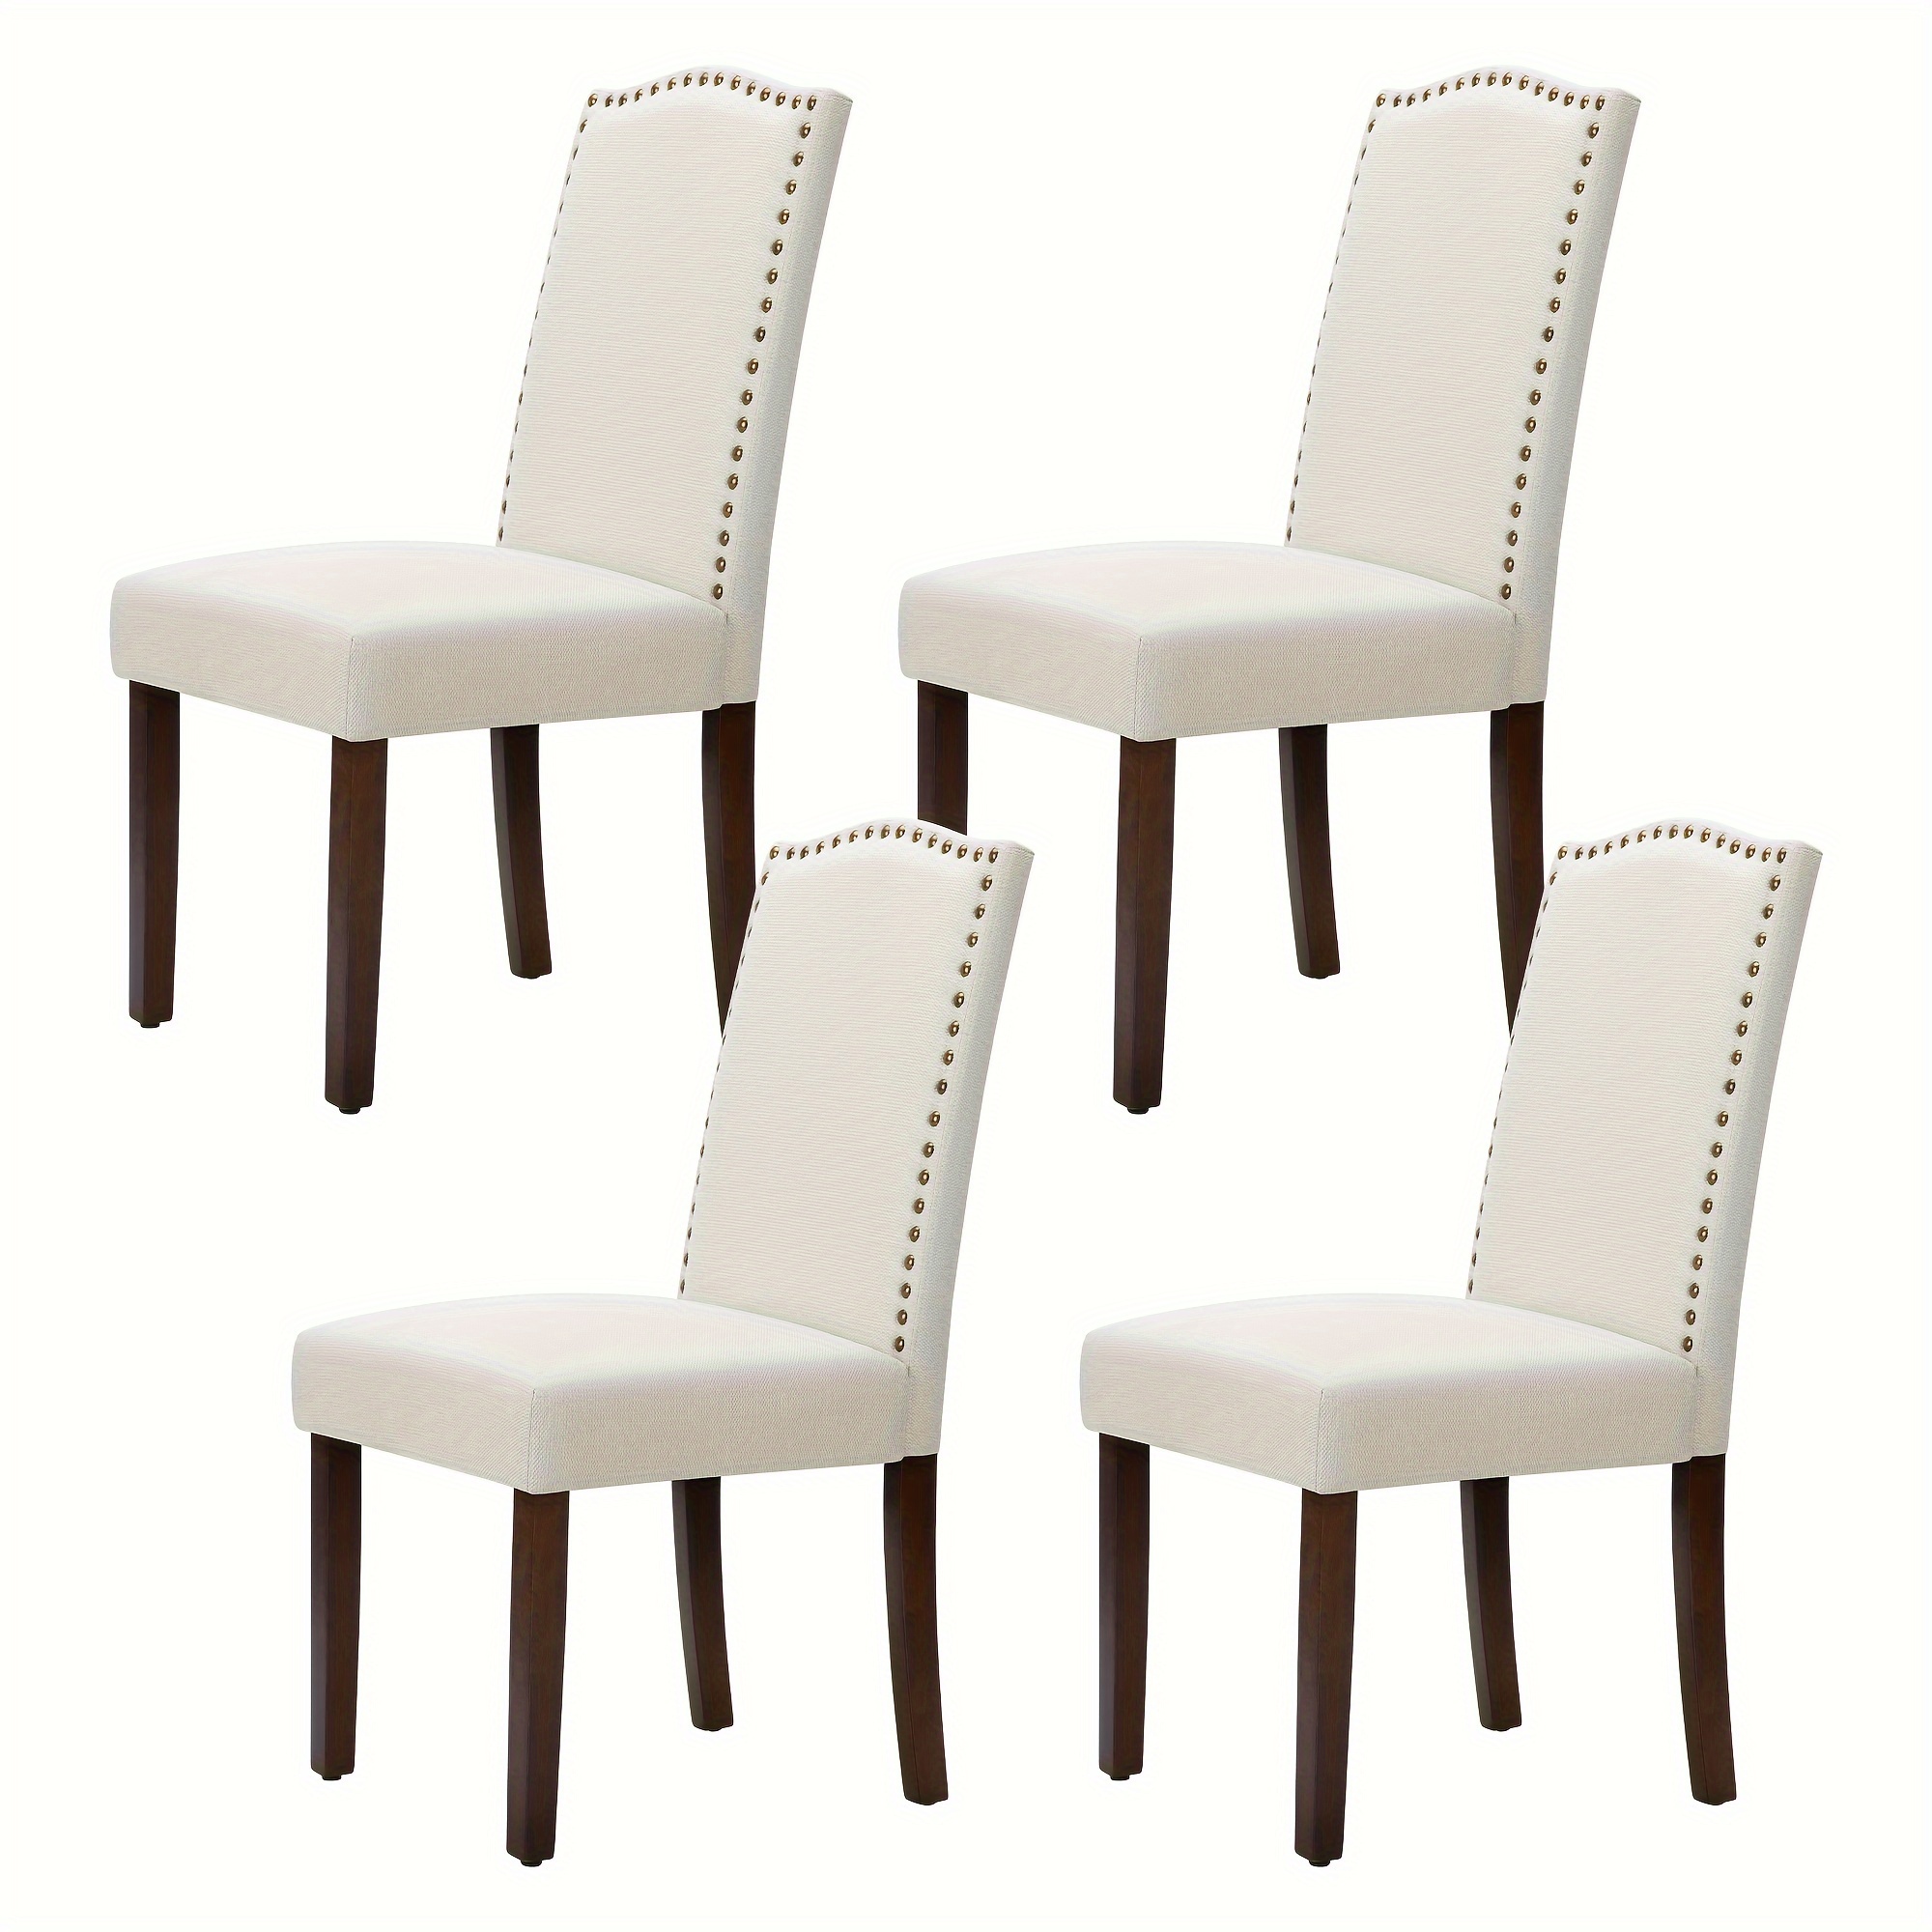 

Chairs Set Of 4, Living Room Chairs, Dining Room Chairs, Upholstered Fabric Dining Chairs, Parsons Chairs With Nailhead Trim And Wood Legs, Modern Armless Kitchen Side Chair